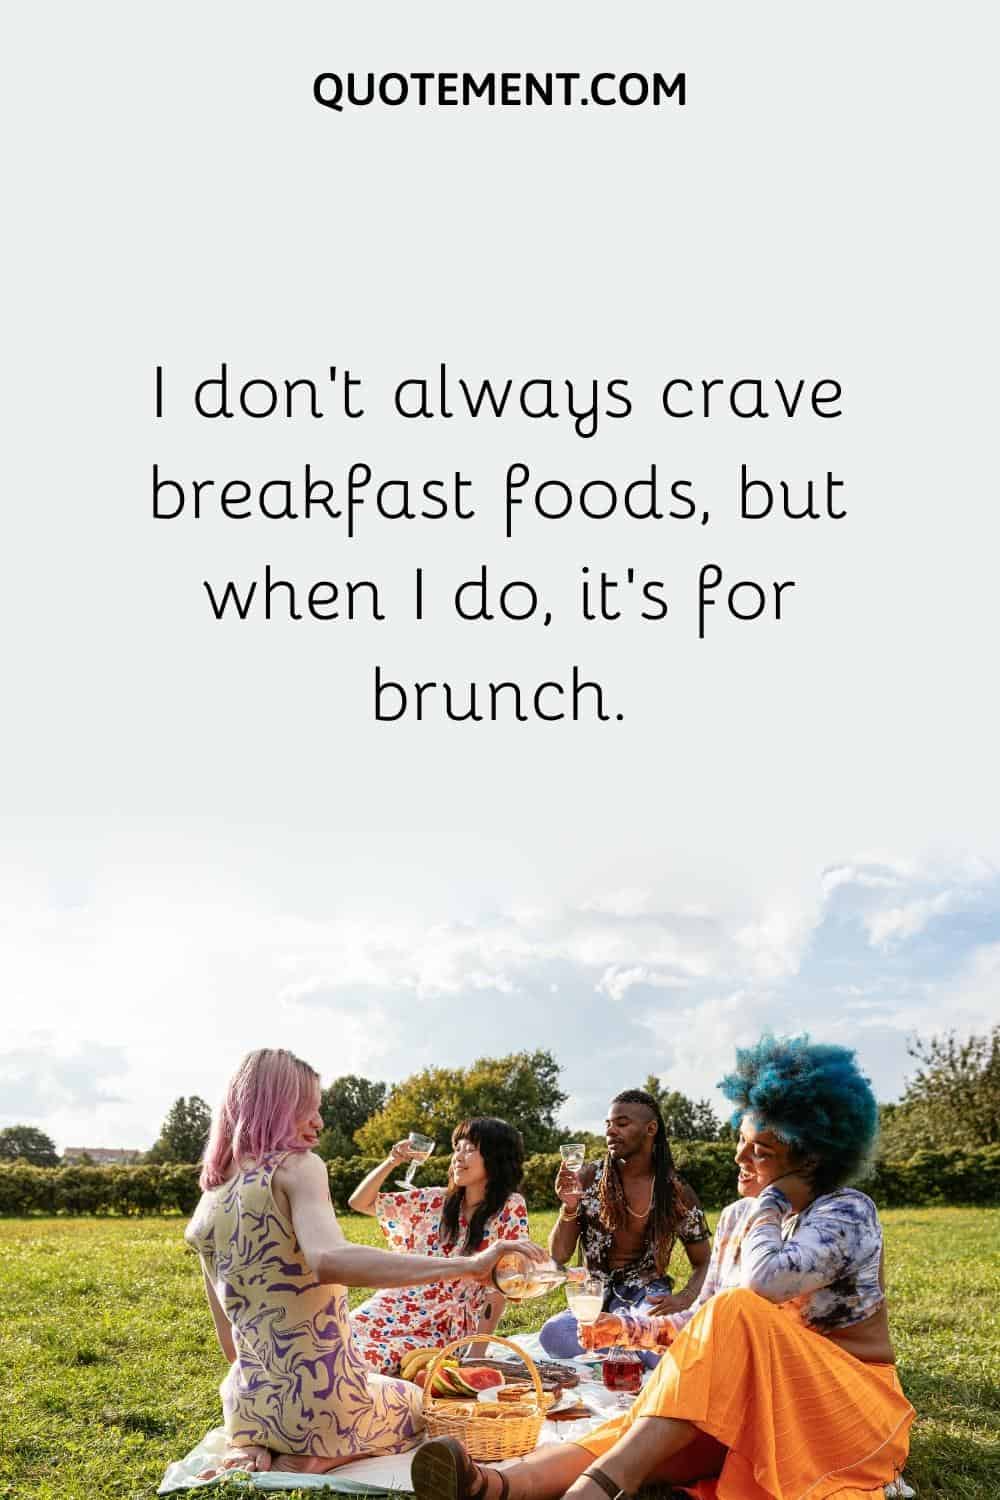 I don’t always crave breakfast foods, but when I do, it’s for brunch.